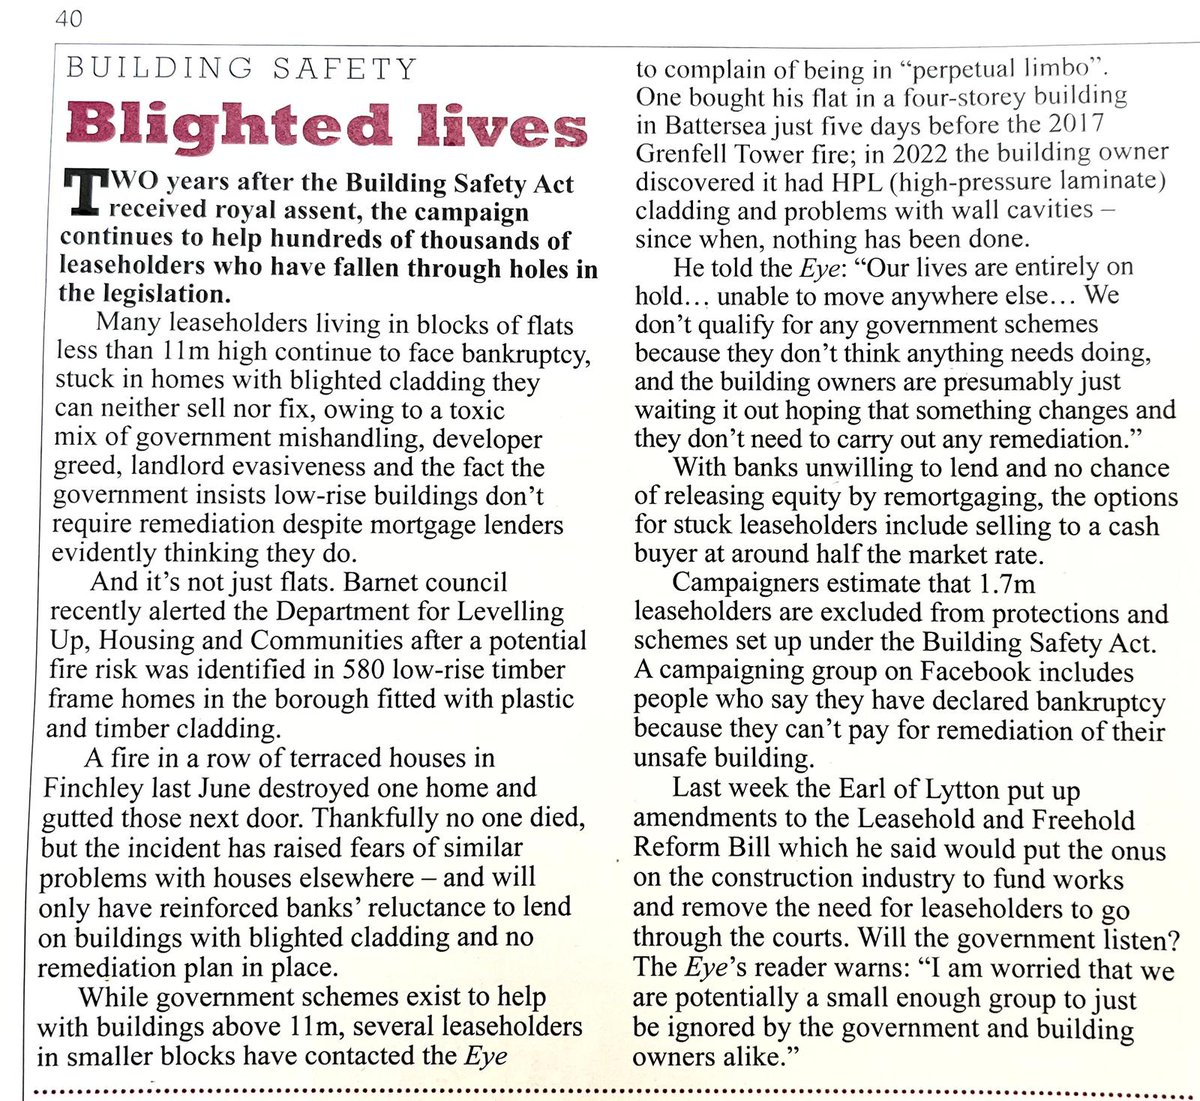 Grateful to @PrivateEyeNews for covering the immense and growing need for the Earl of Lytton's buildingsafetyscheme.org consumer protection for buildings amendments in today's edition. #BuildingSafetyCrisis #EndOurCladdingScandal